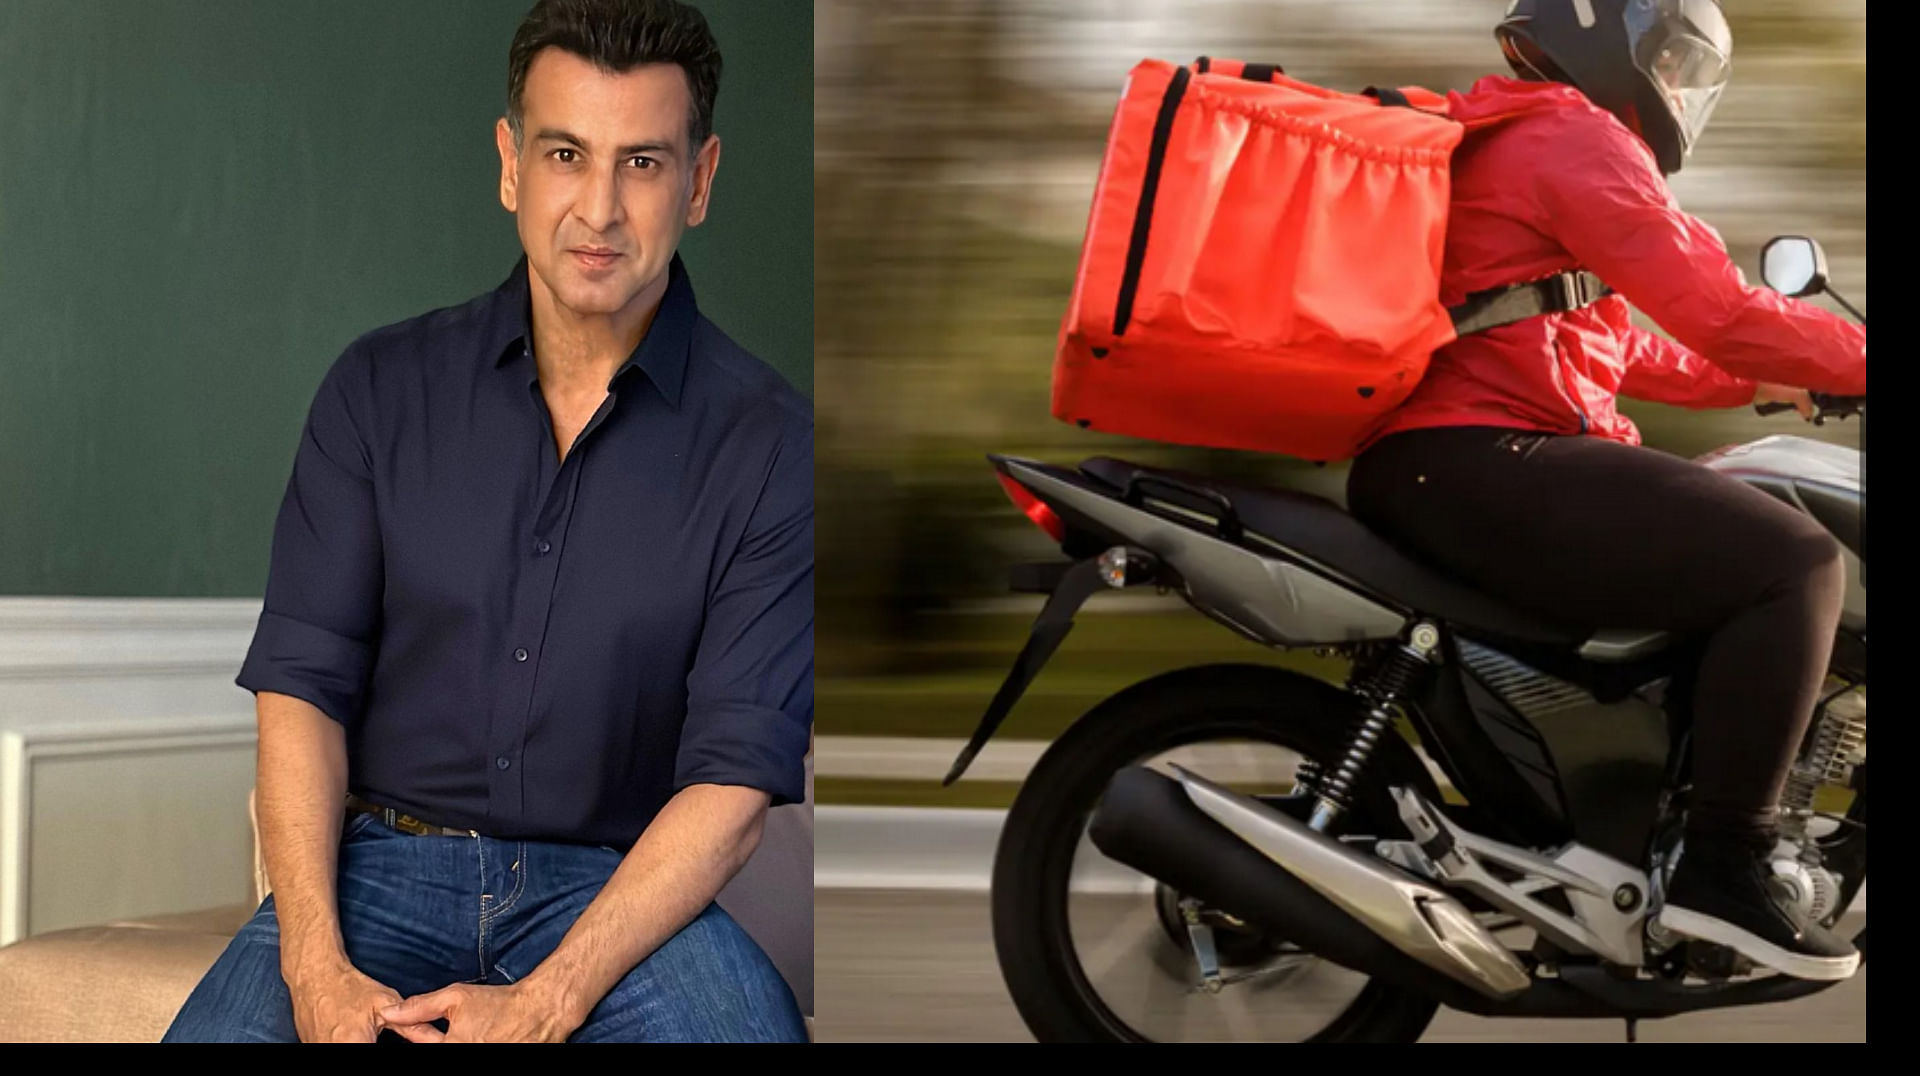 Bollywood actor ronit roy got angry at Swiggy delivery boy said I almost killed one of your riders